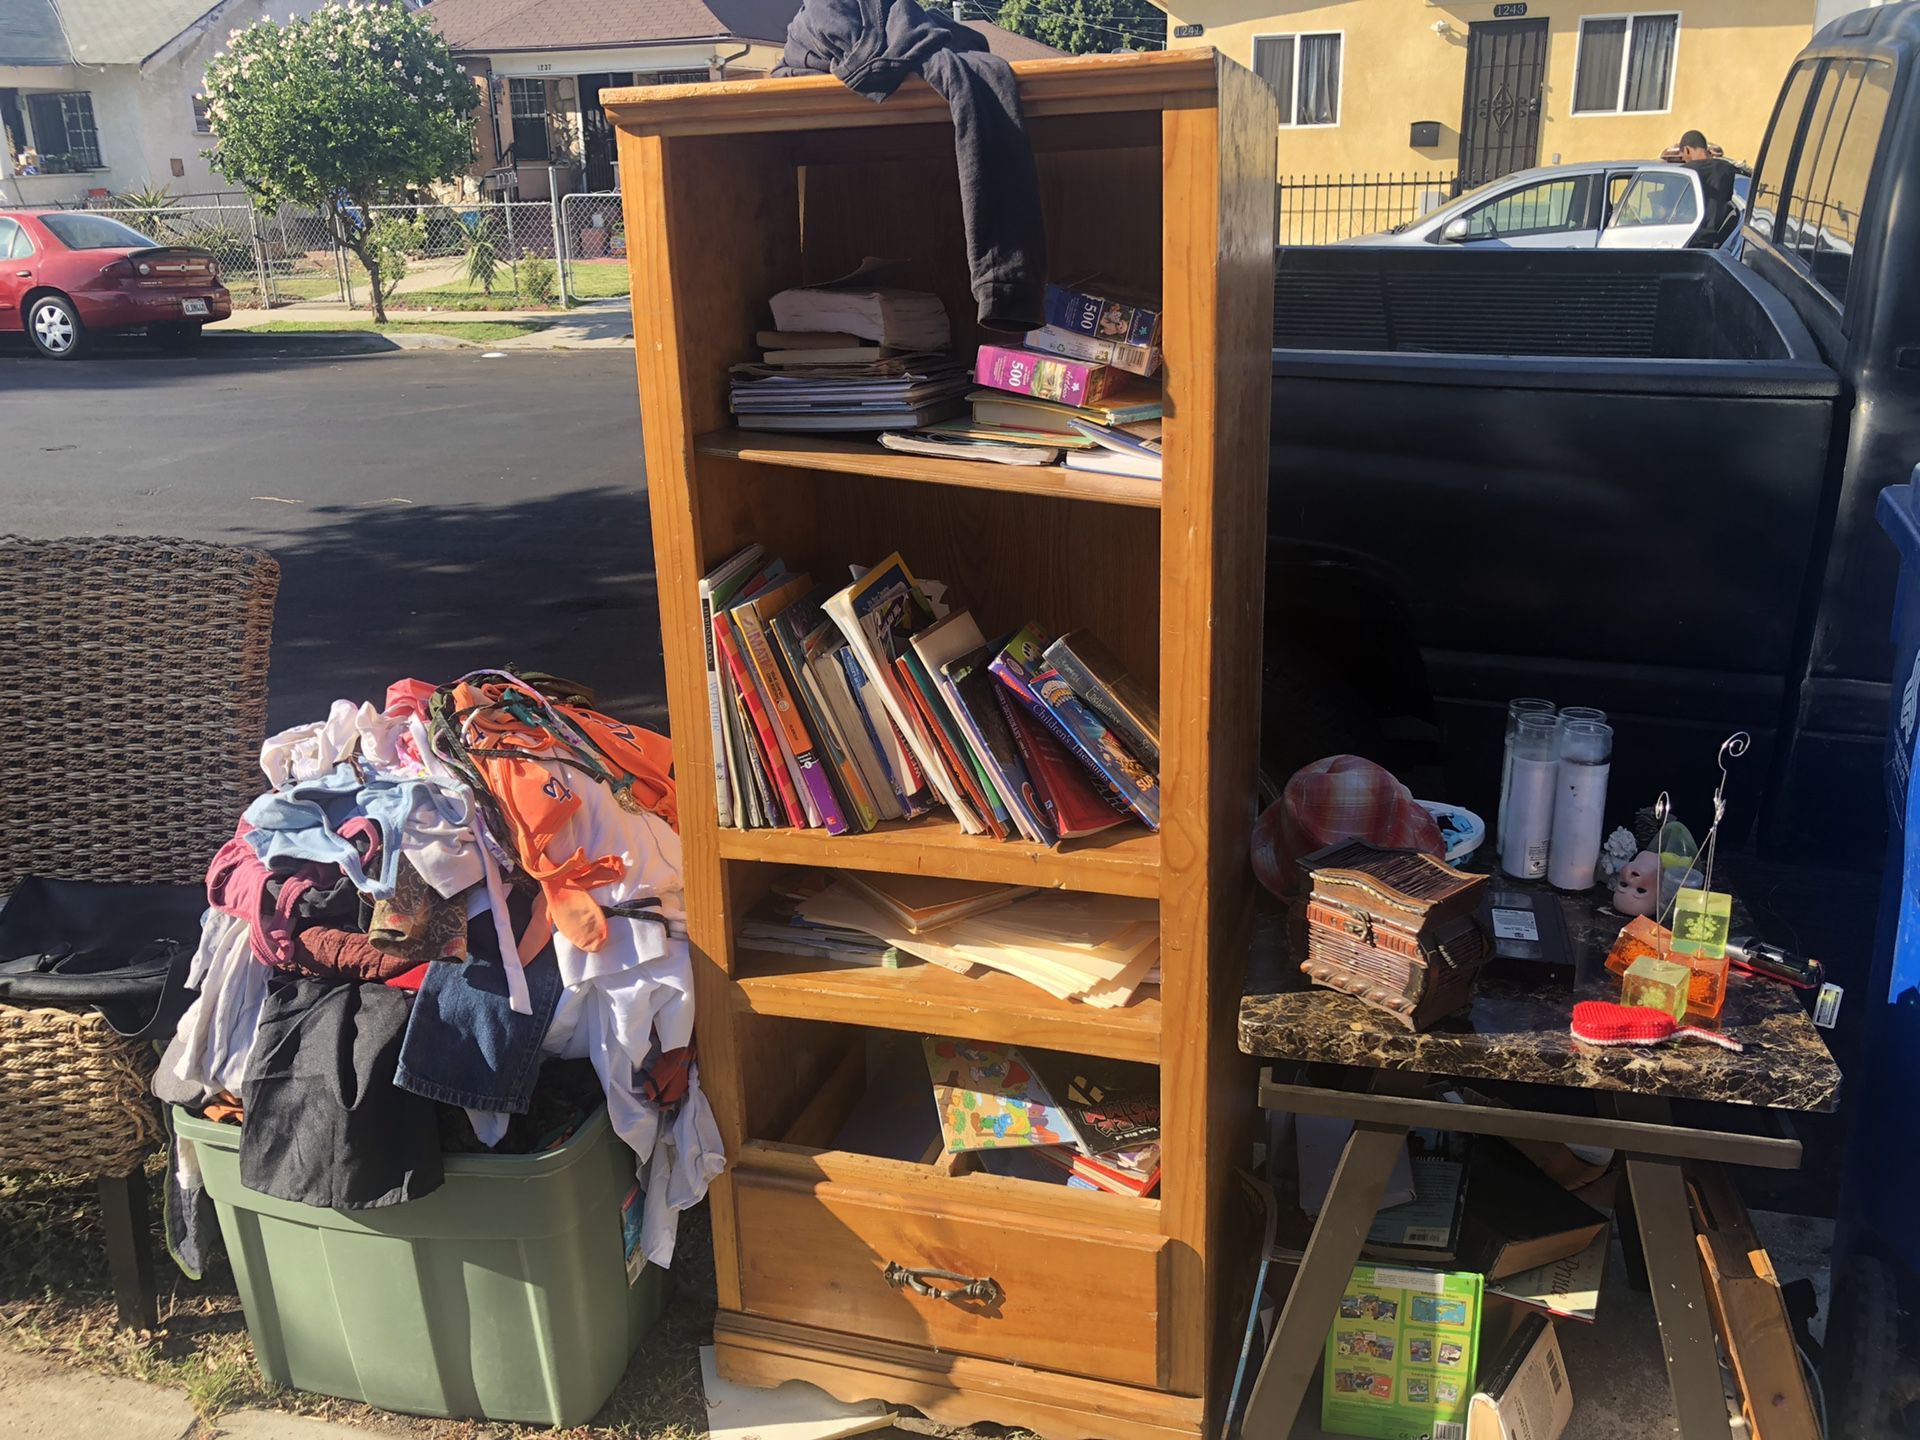 FREE Books, Kids clothes, items, chair